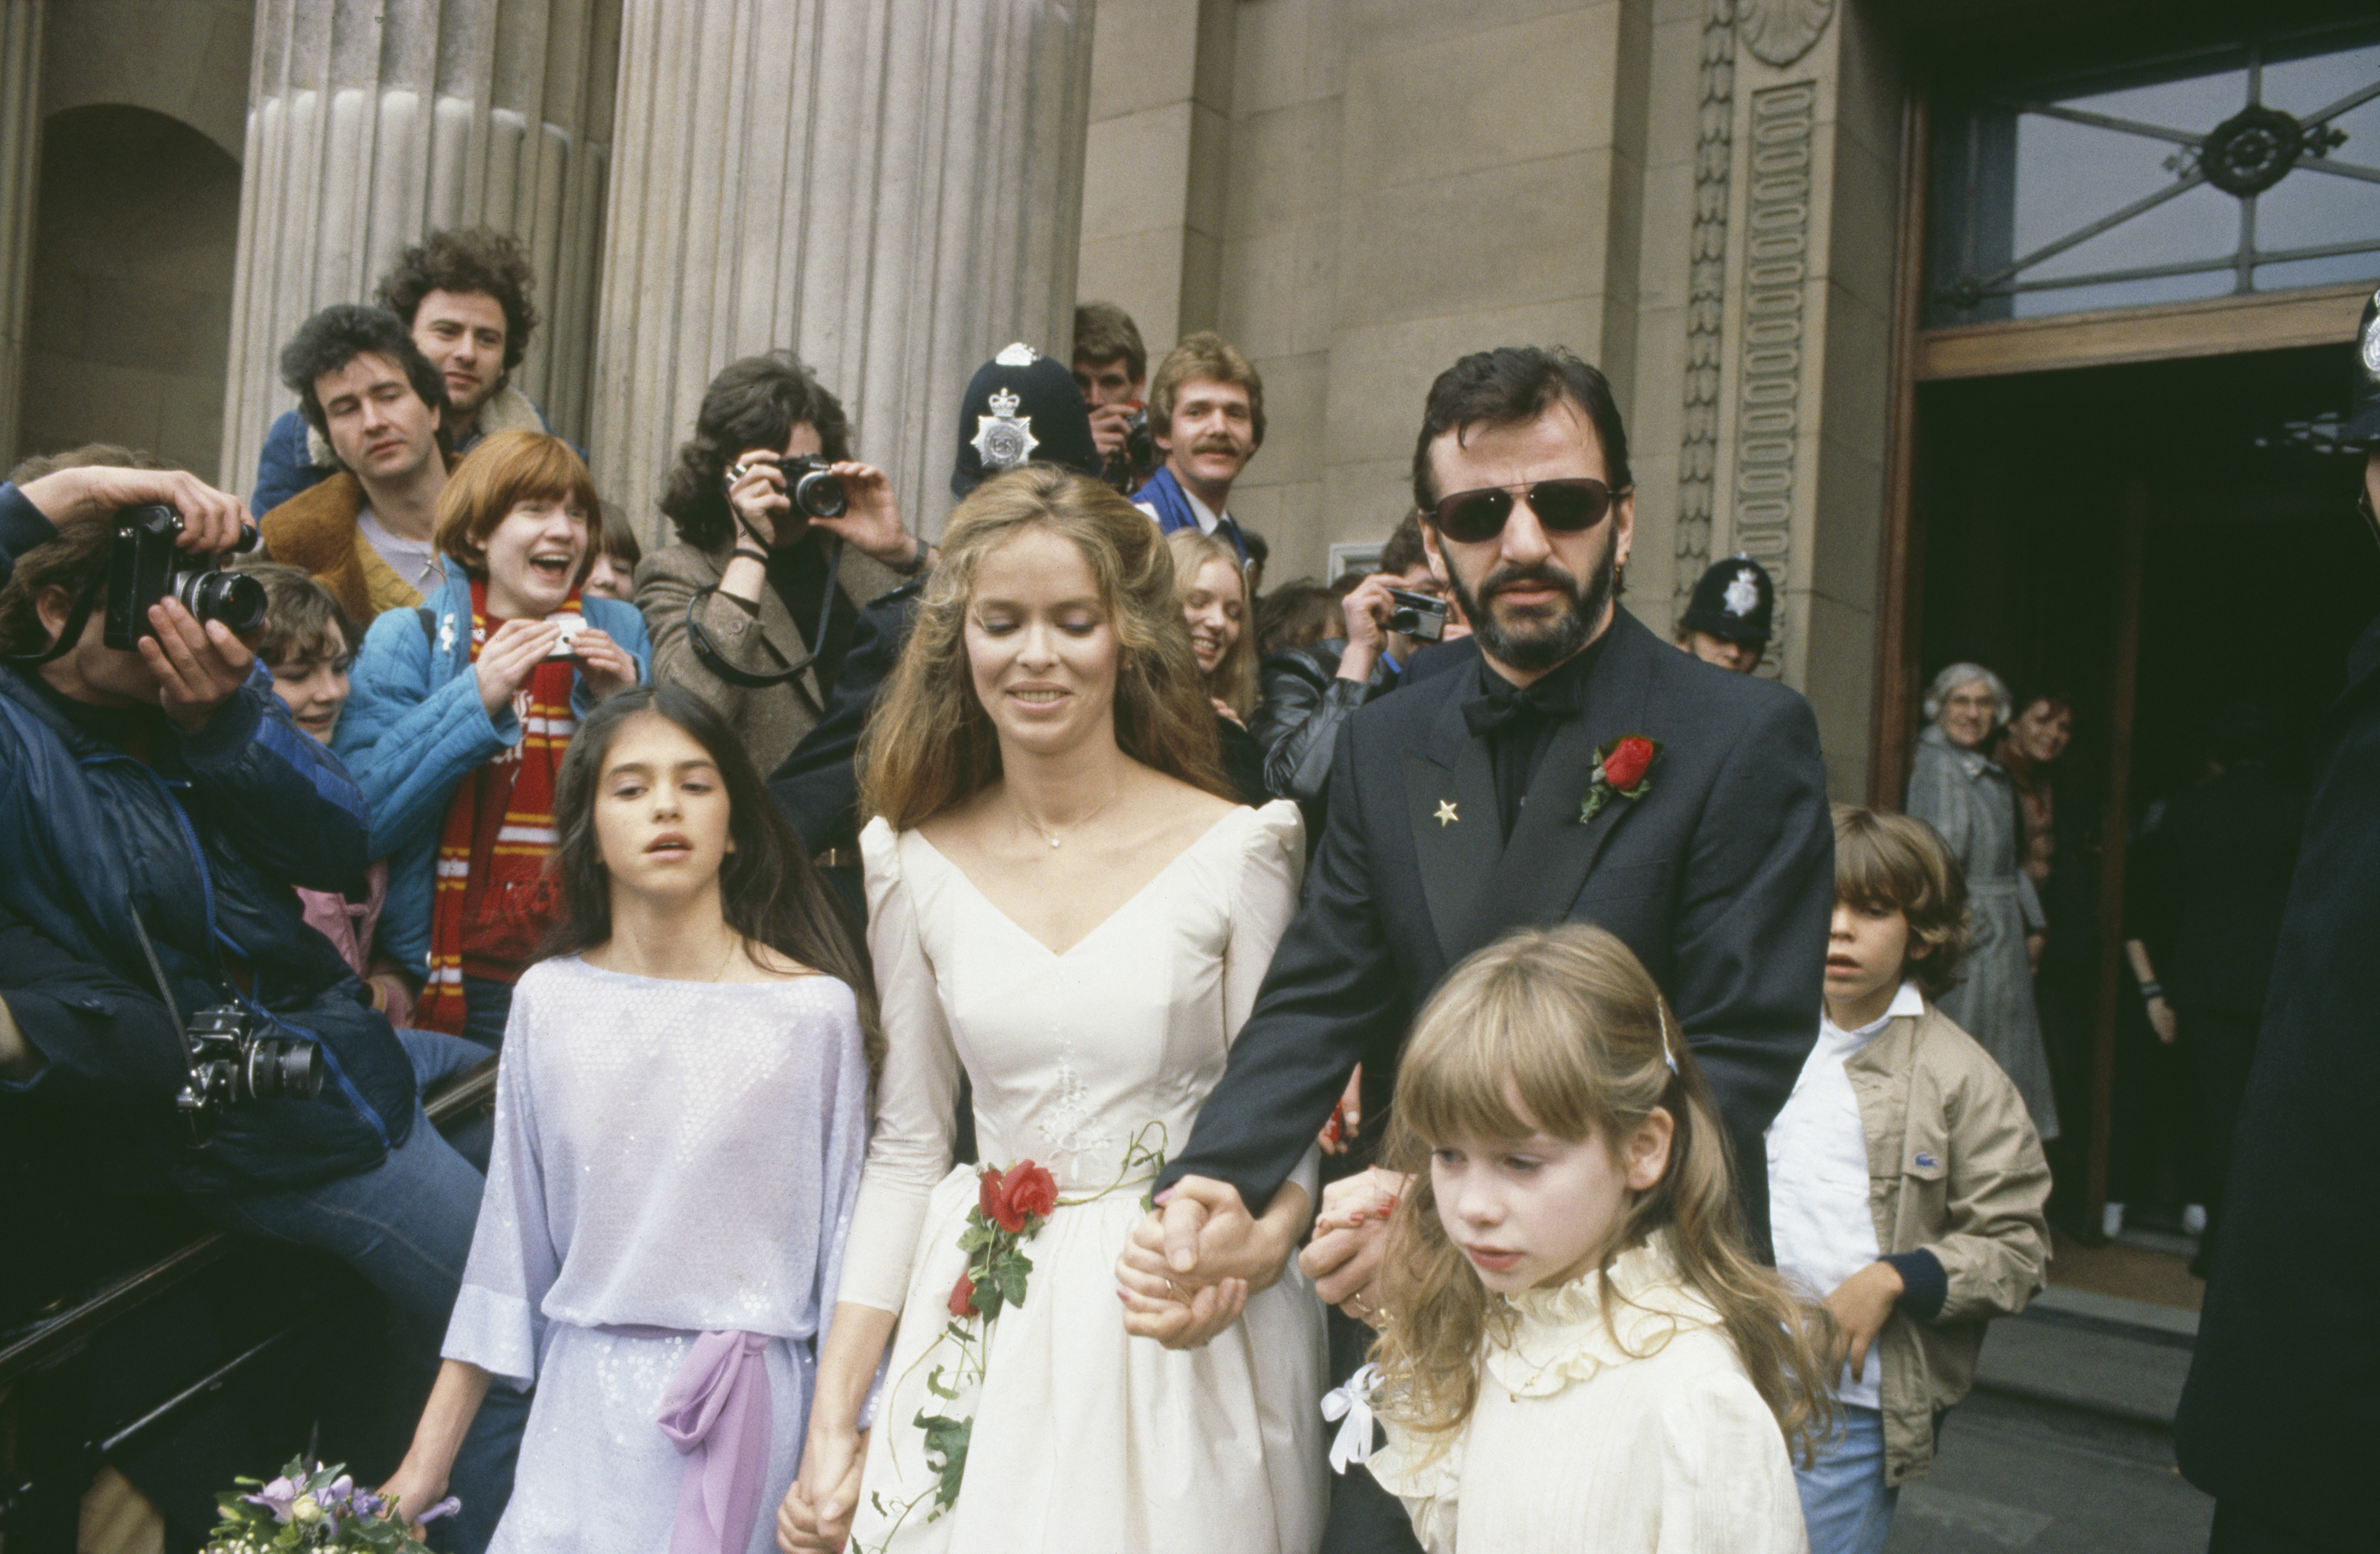 Ringo Starr and Barbara Bach leaving Marylebone Register Office after their wedding in London, April 27, 1981, with their bridesmaids, Bach's daughter Francesca Gregorini and Starr's daughter Lee Starkey on April 27, 1981 | Source: Getty Images